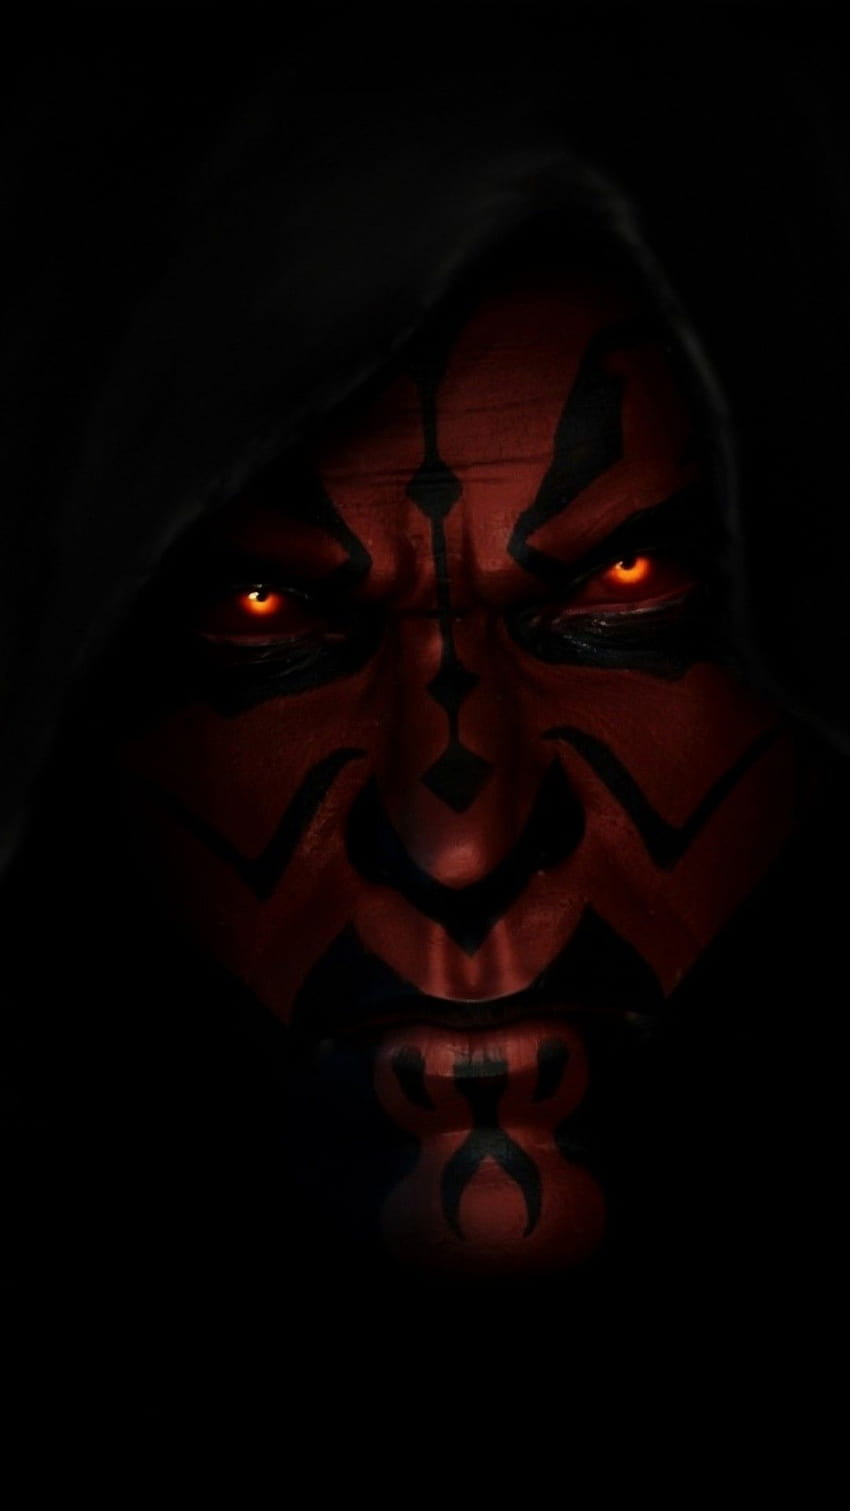 Darth Maul IPhone Wallpaper  IPhone Wallpapers  iPhone Wallpapers